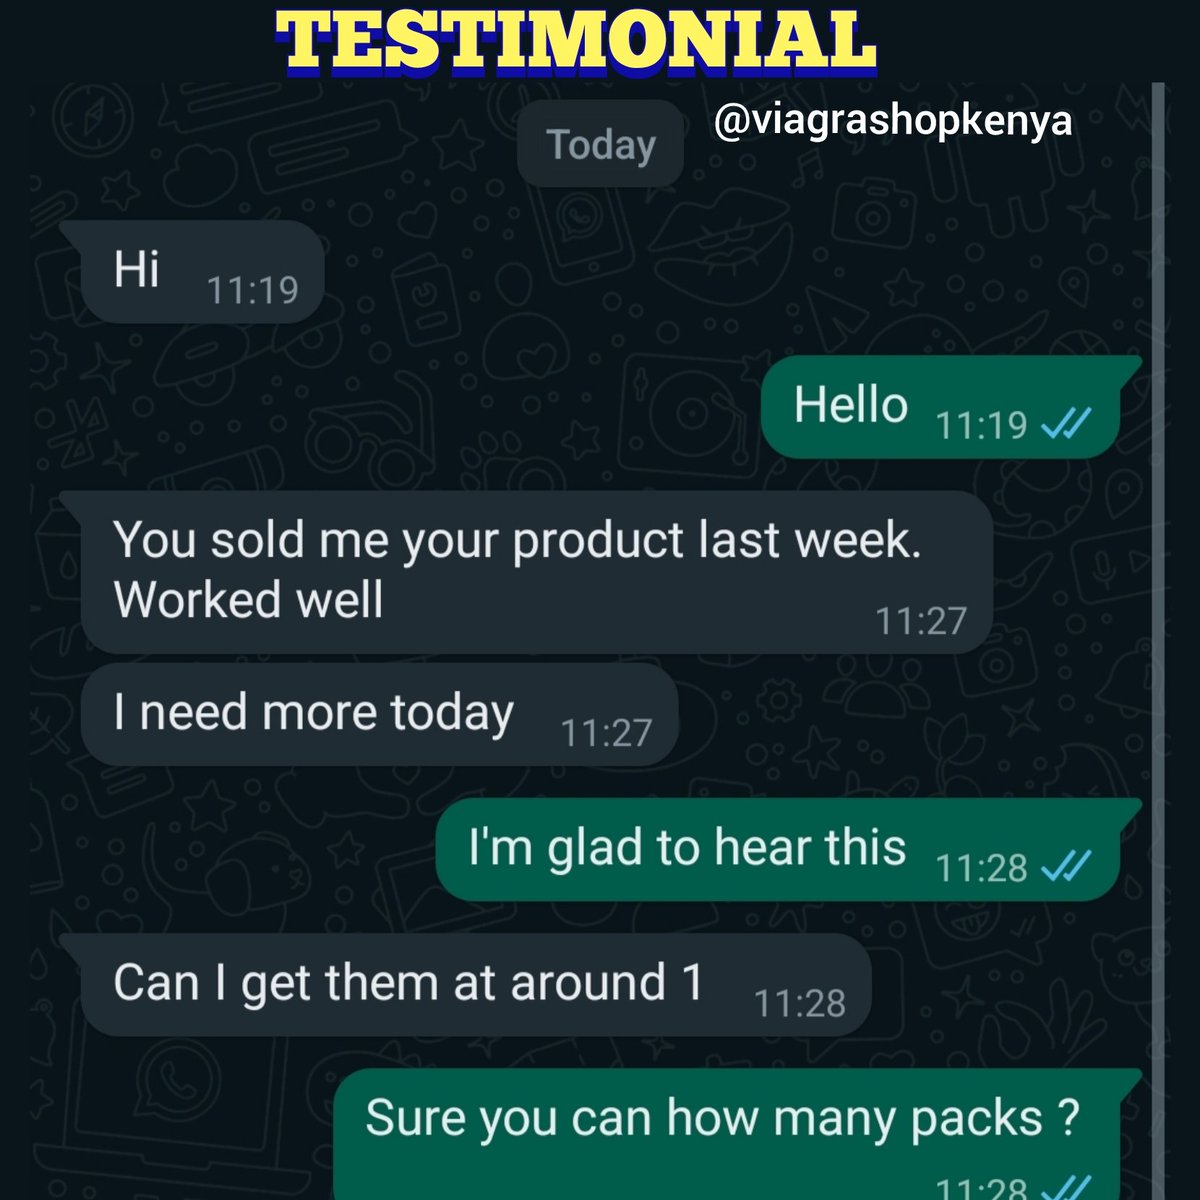 Testimonials 💯 Our products are proven and tested. Always a pleasure to serve you ☺️
.
.
.
.
.
.
.
.
#viagrakenya 
#ordersildenafil 
#orderviagra 
#erectiledysfunctioncure 
#libidobooster 
#testosteroneboost 
#testimony